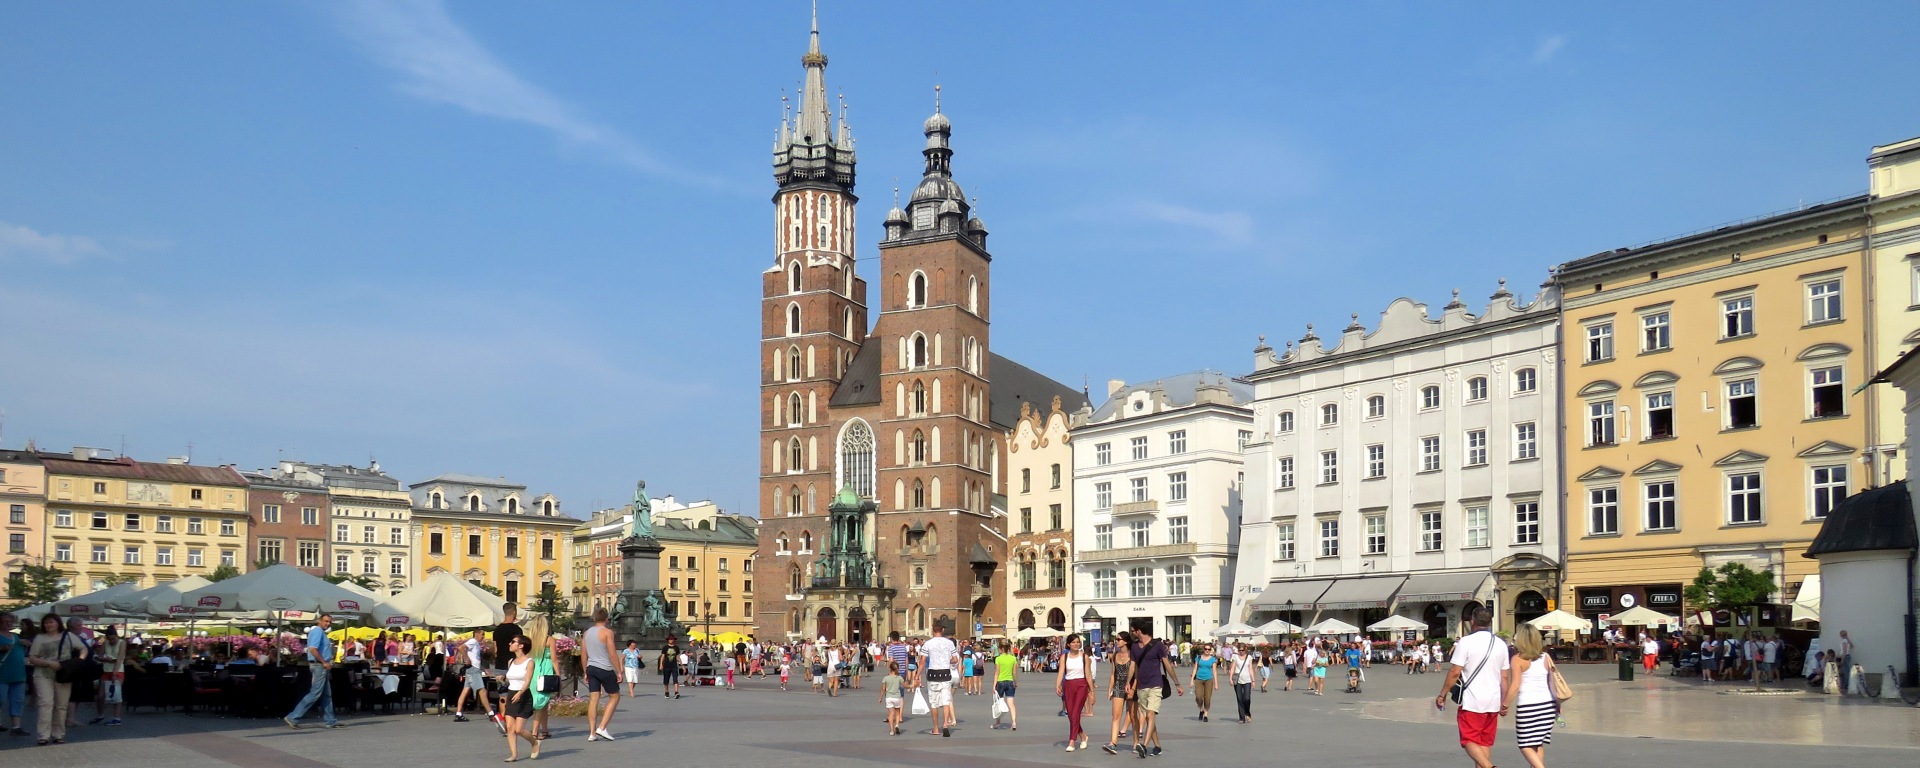 Main Square and Saint Mary's Church Krakow - Read more at www.beautifulfillment.com